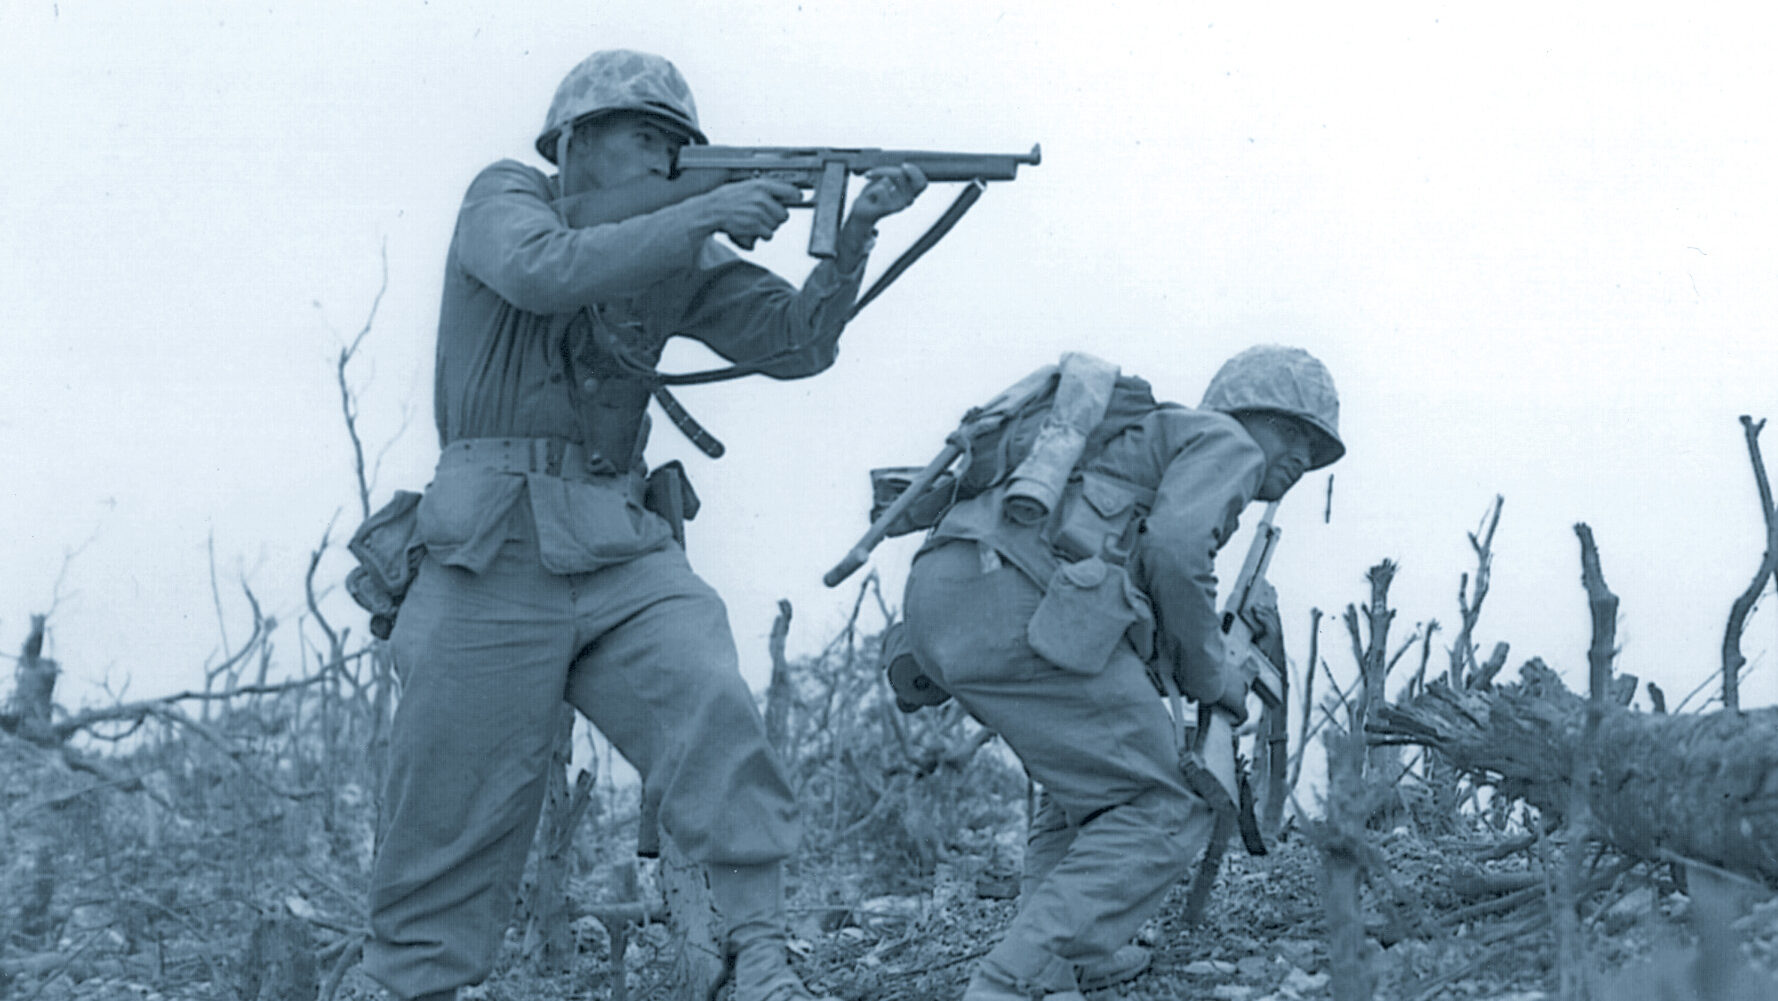 While one U.S. Marine inches forward, another fires a Tommy gun at Japanese positions on Okinawa in April 1945.